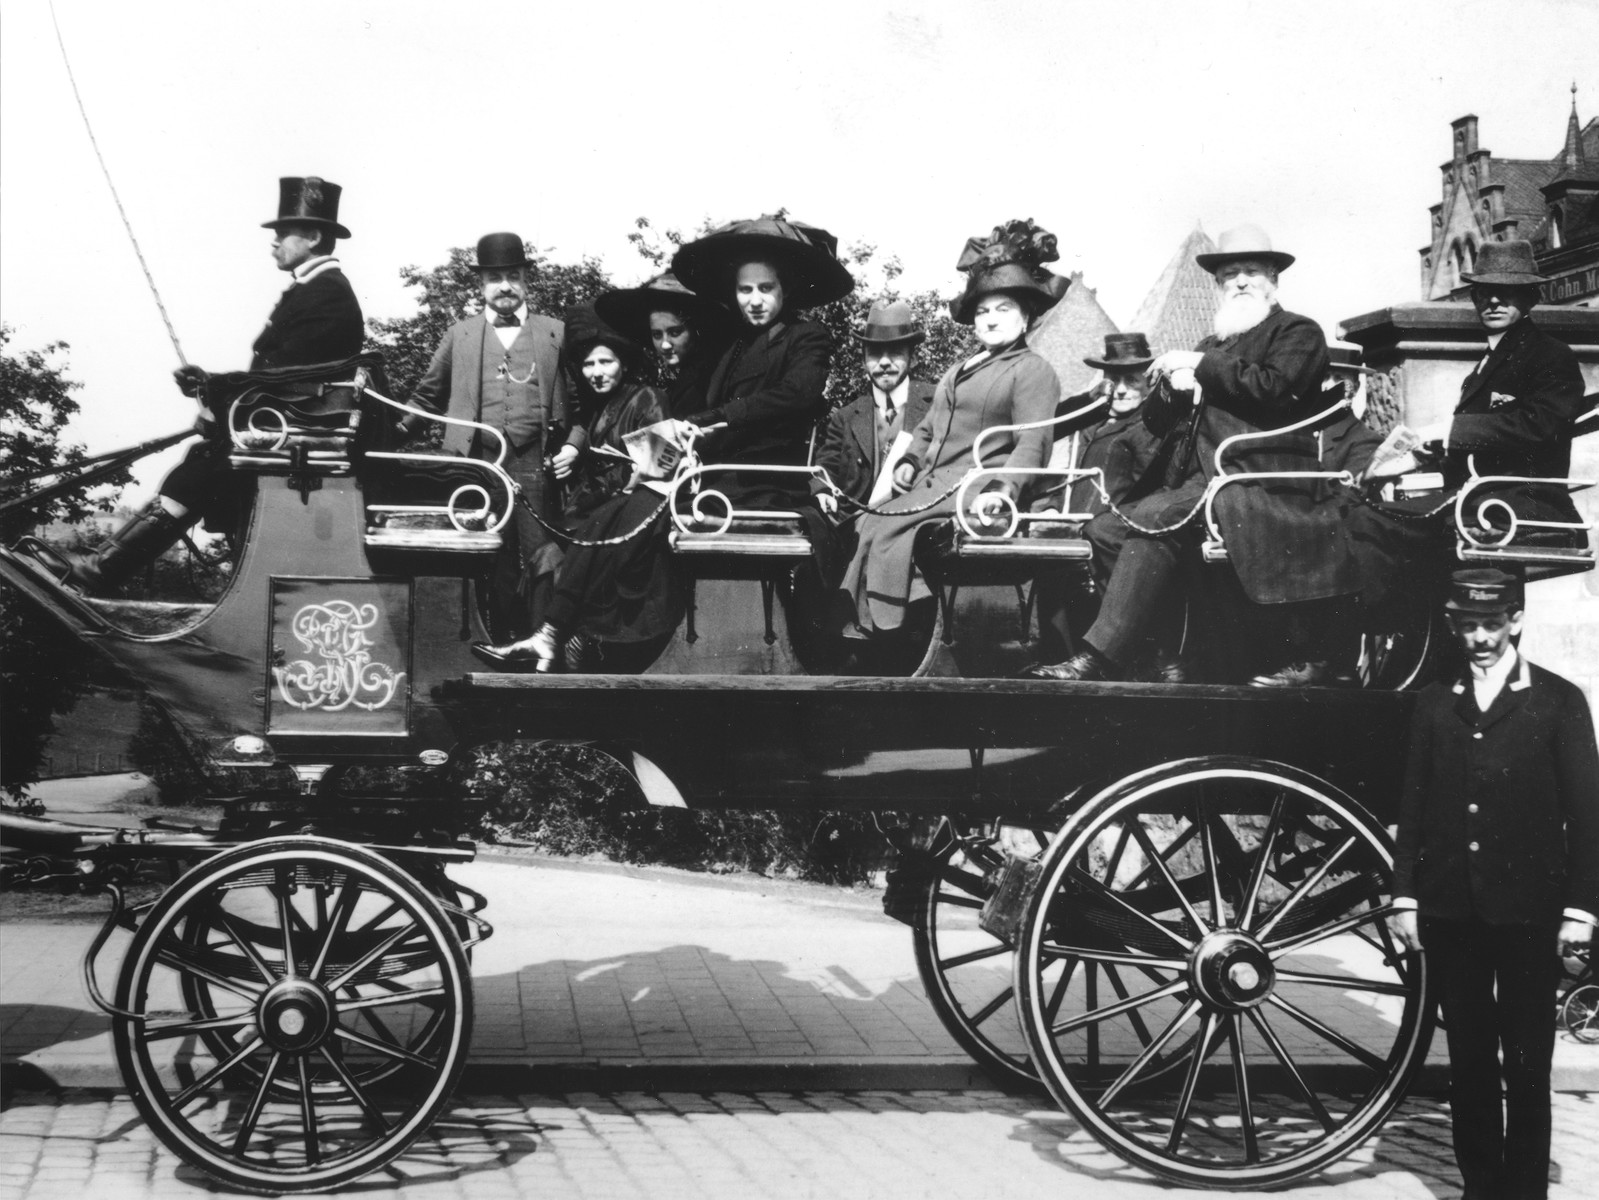 The Gottschalk family riding in a horse-drawn carriage.  

Pictured behind the coachman are Hugo, Bertha, Gertrud and Kaethe Gottschalk.